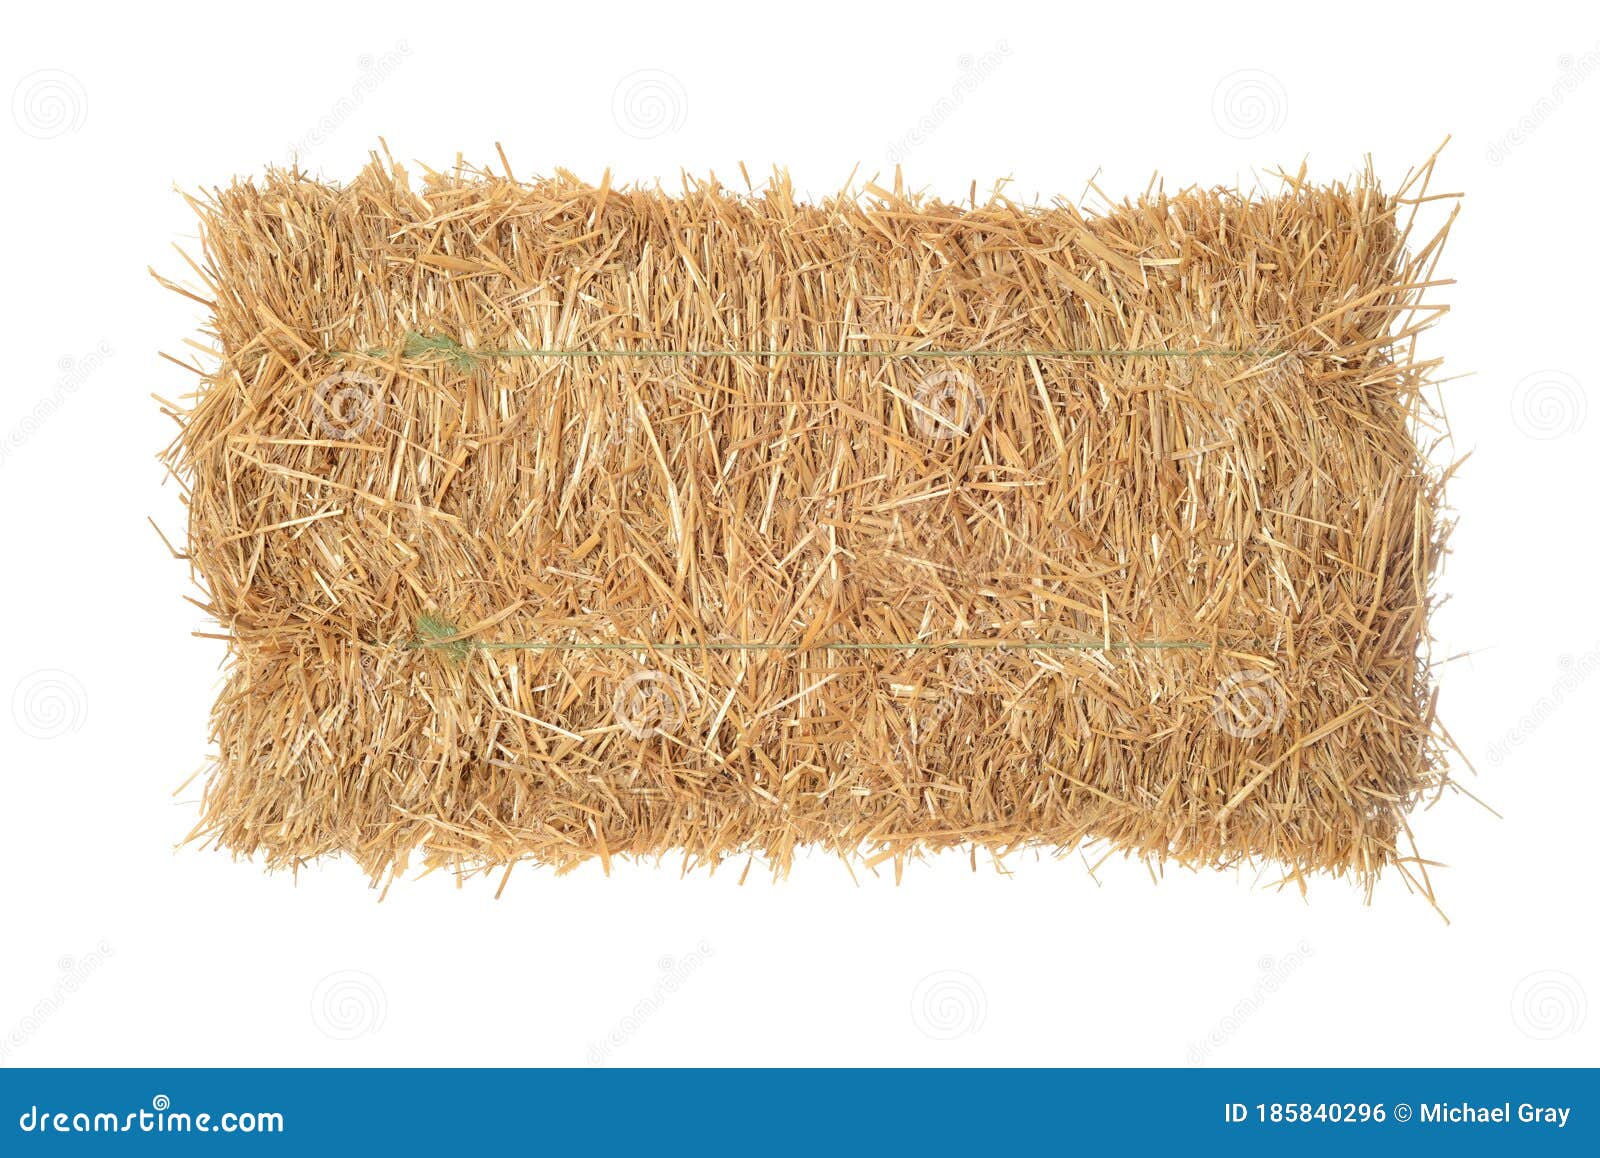  top view bale of straw